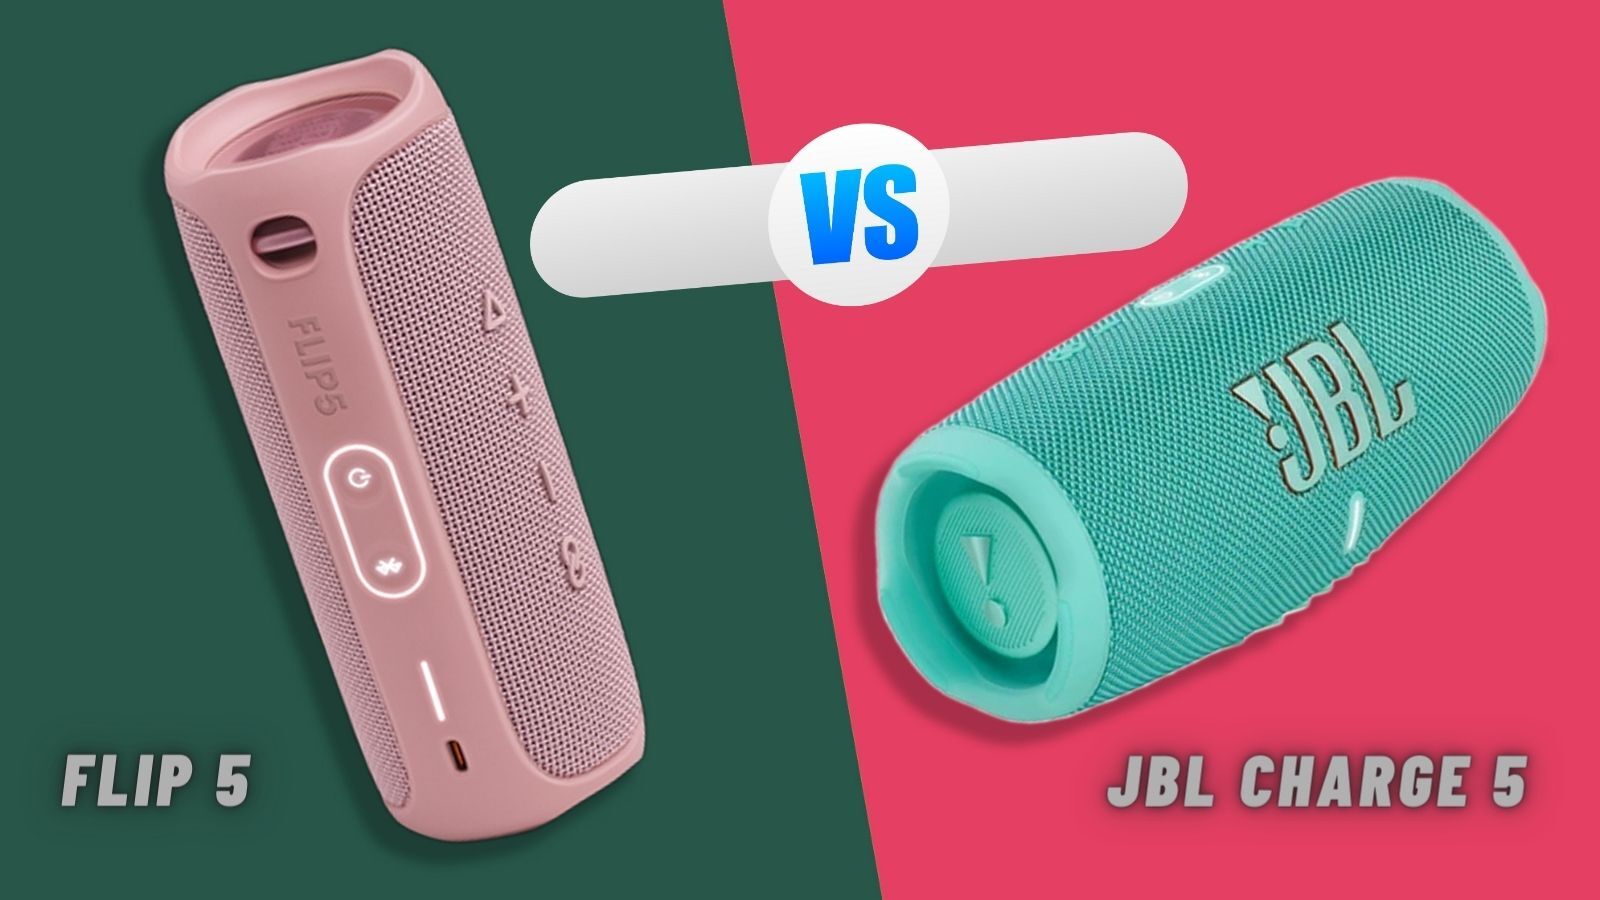 JBL Charge 5 vs. Flip 5: What Is the Difference?